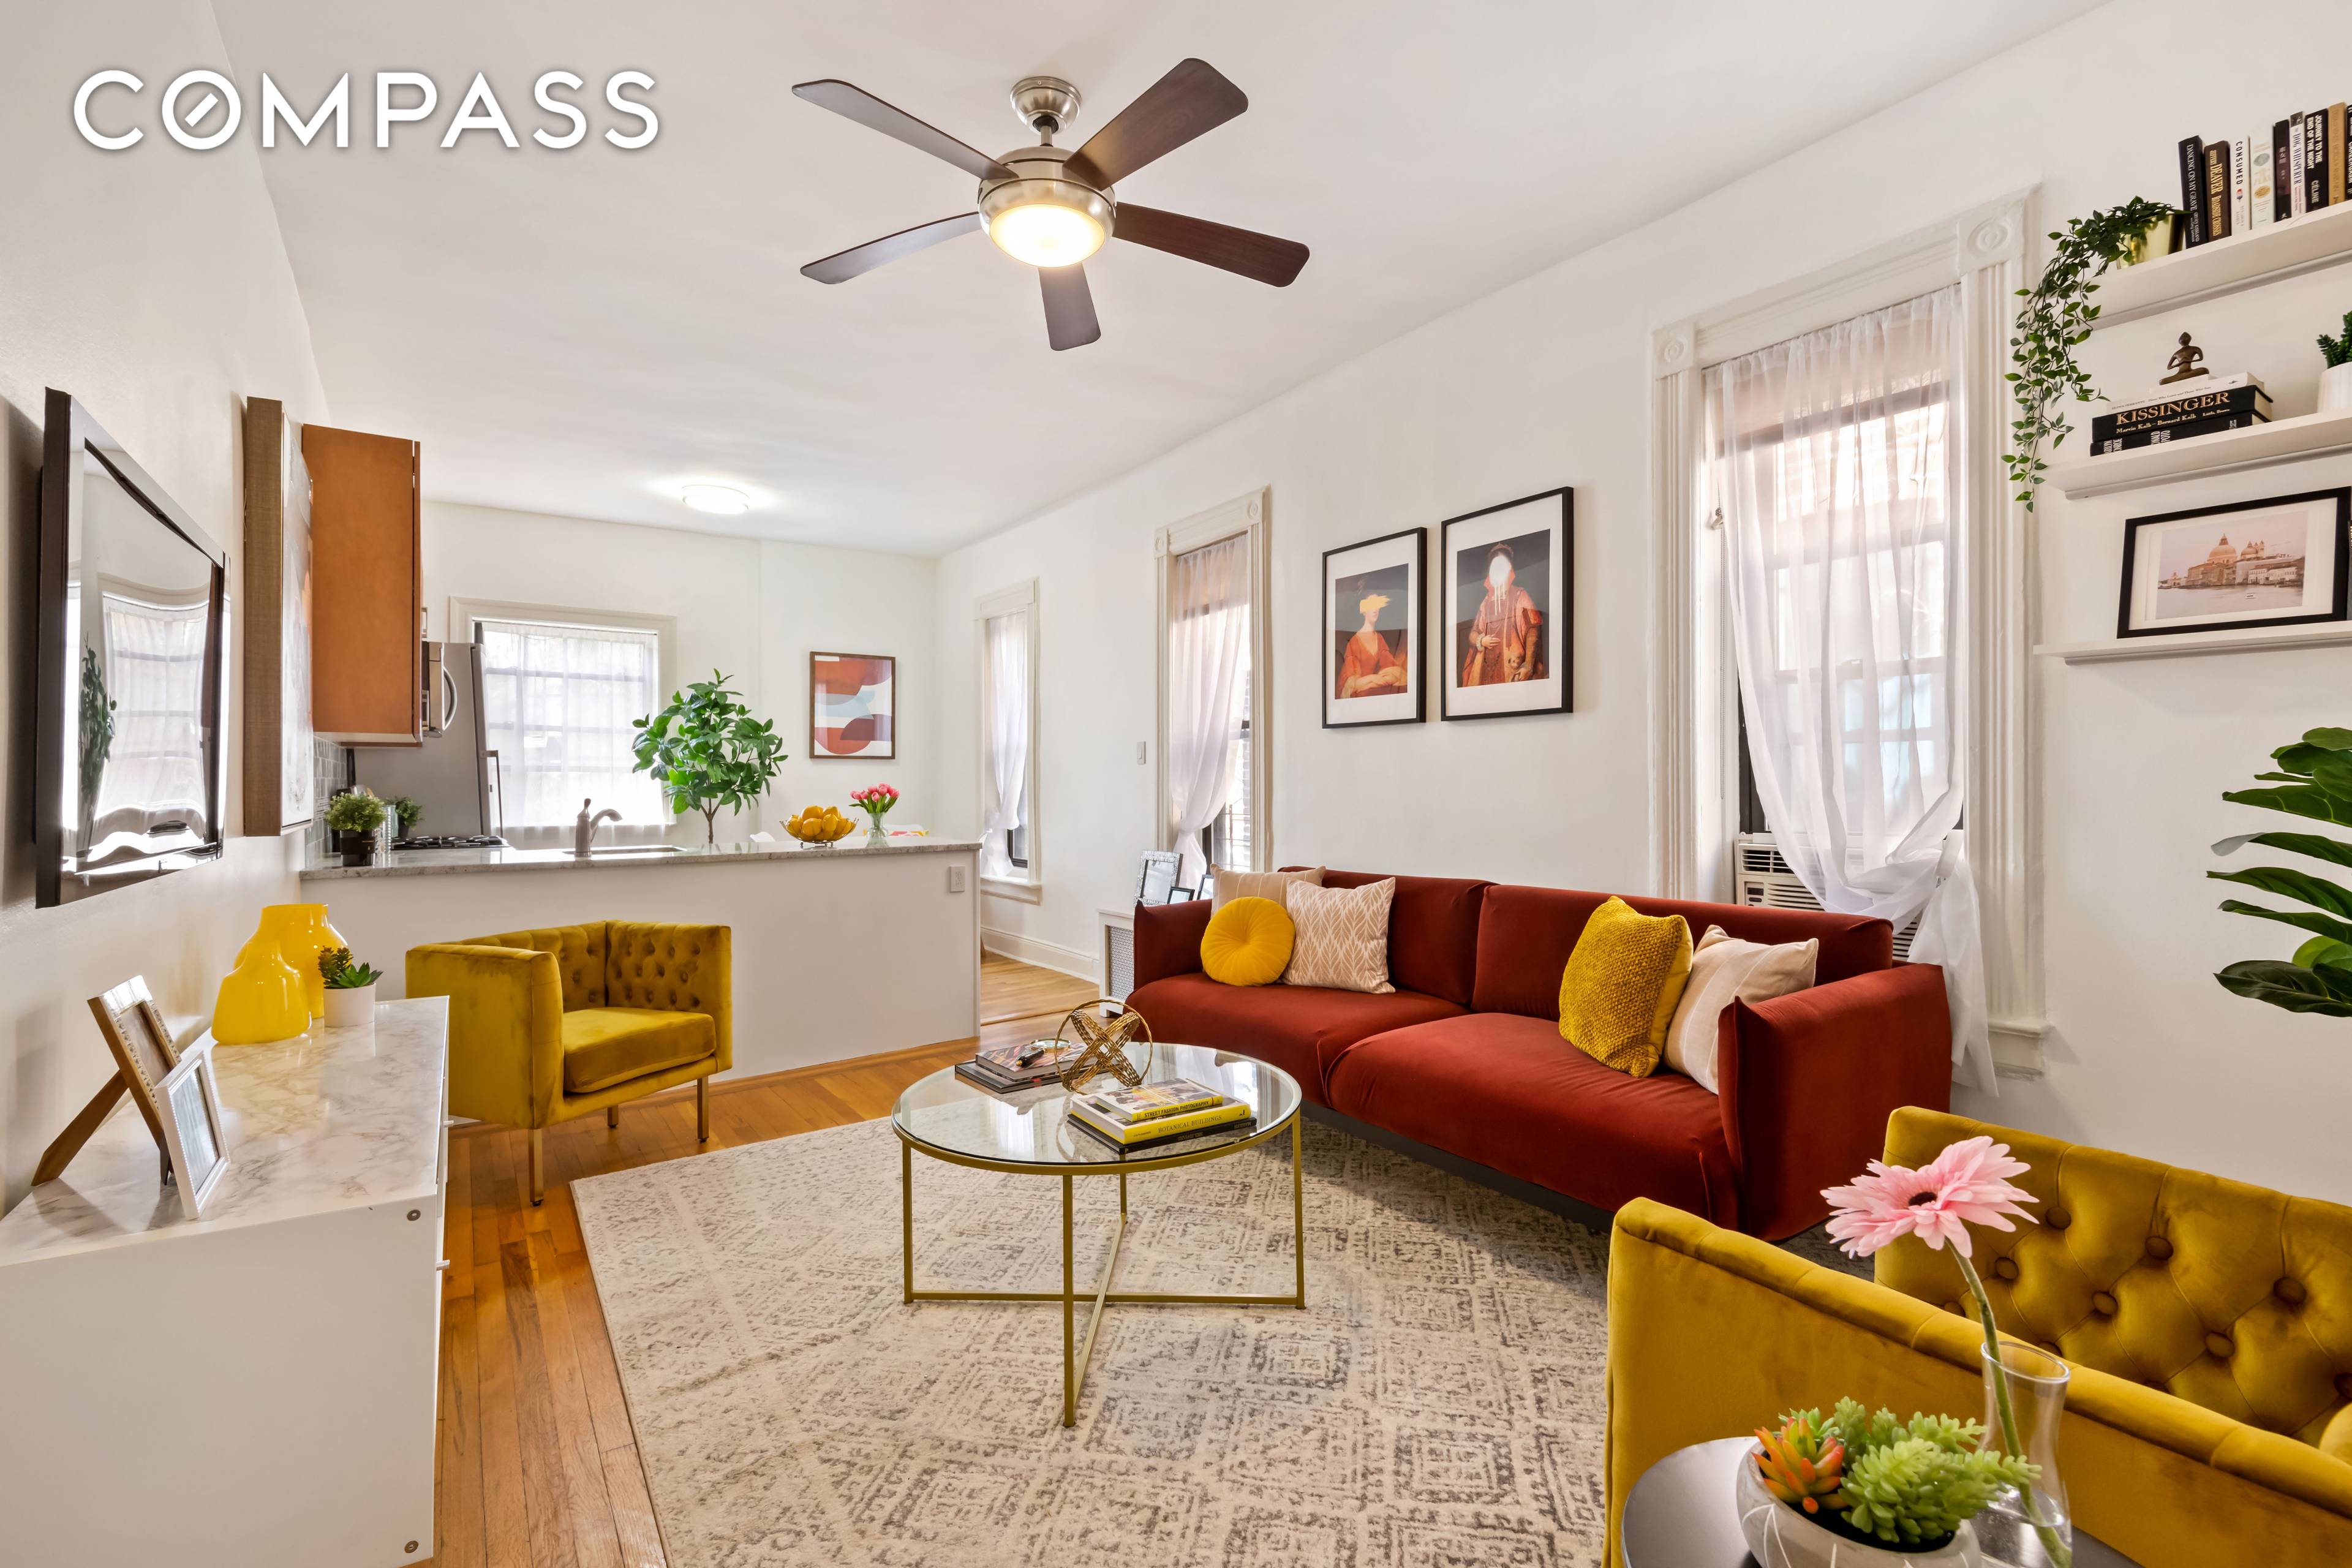 Perched on the highest floor of an elegant brownstone, this open, airy two bedroom home has all the comforts of Brooklyn brownstone living.